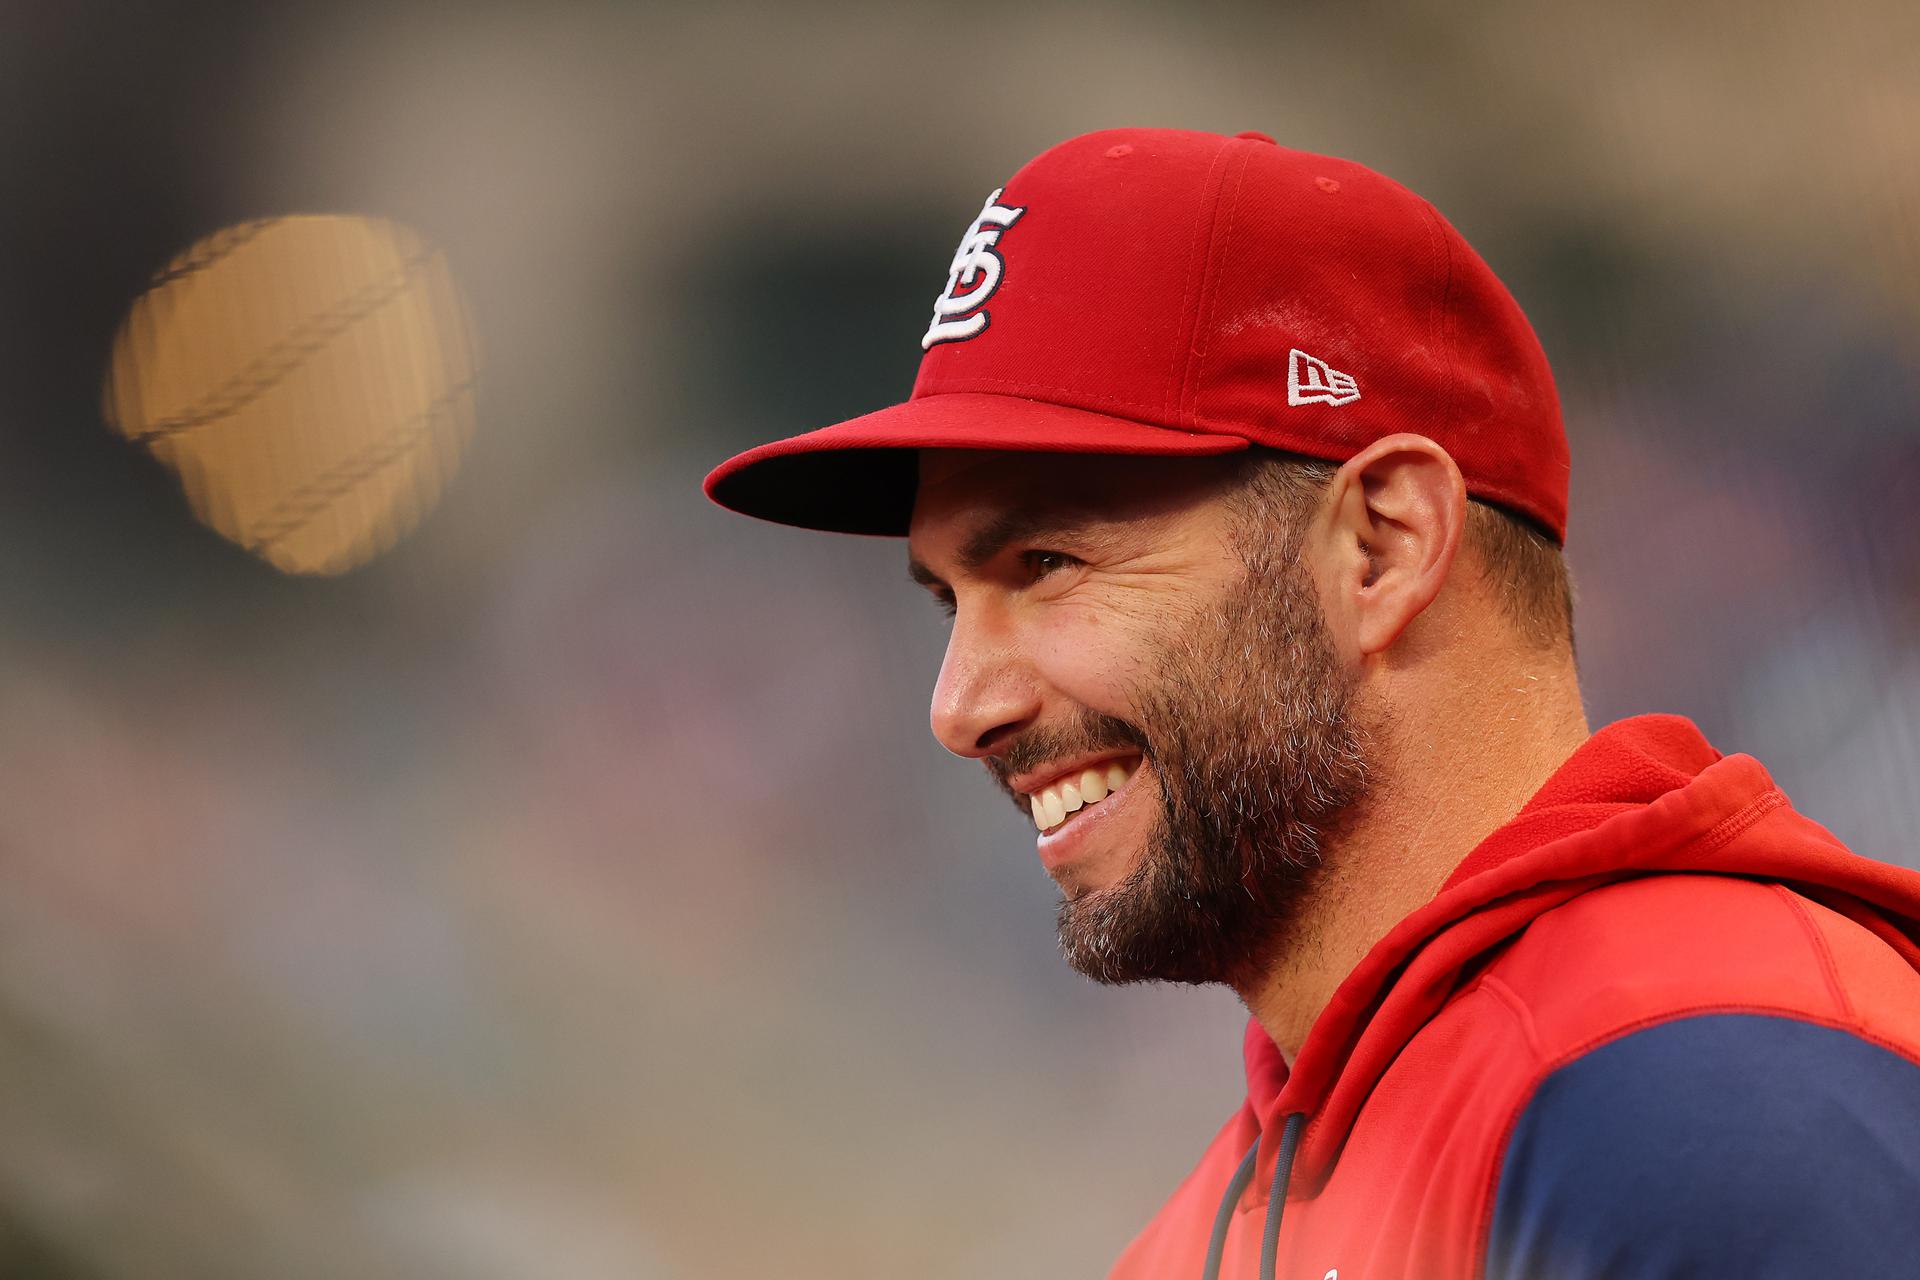 Cardinals player Paul Goldschmidt smiles while wearing a red hat and red hoodie